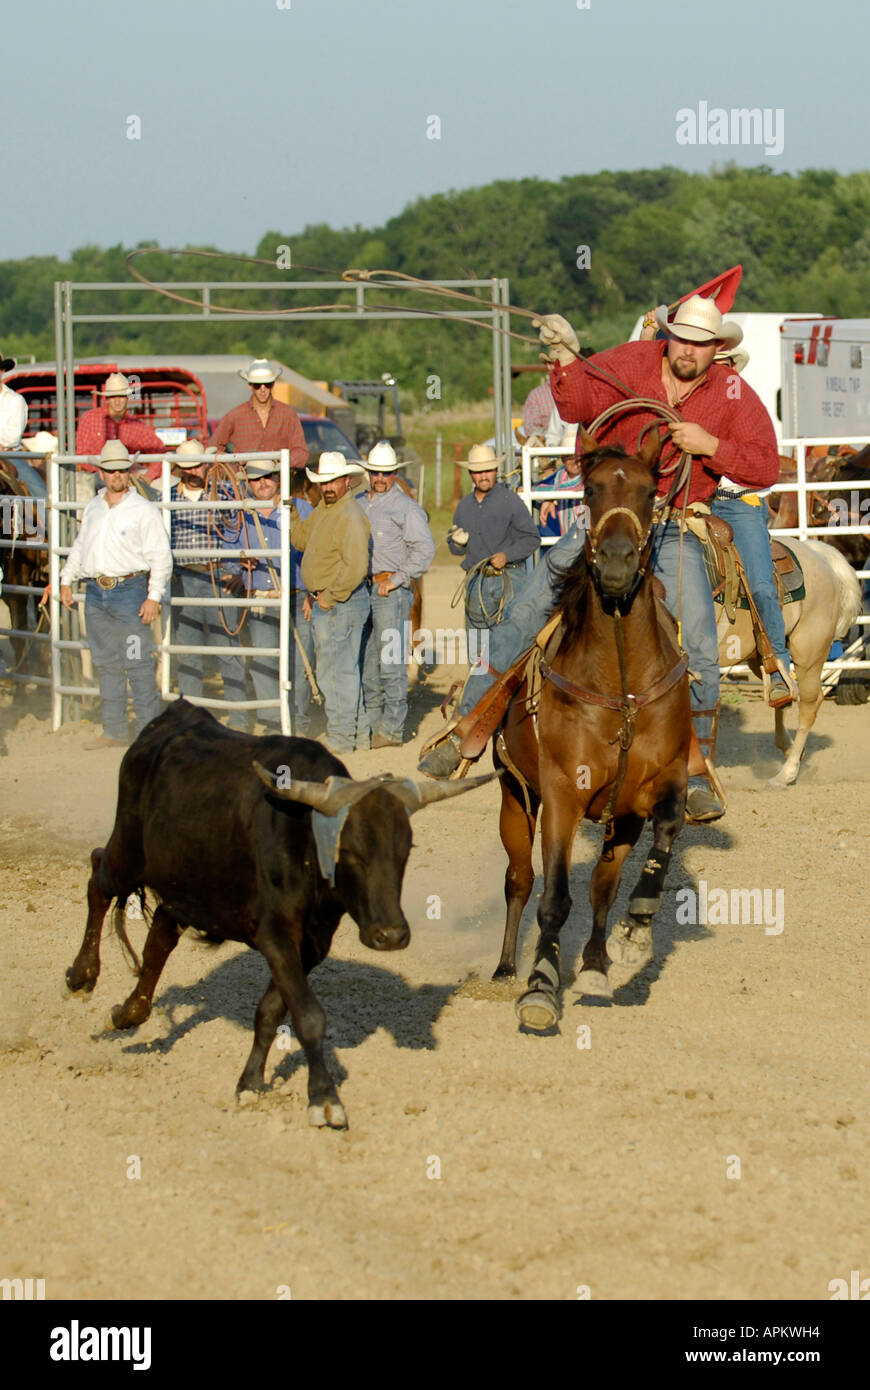 Cowboys participate in Rodeo calf roping event Stock Photo